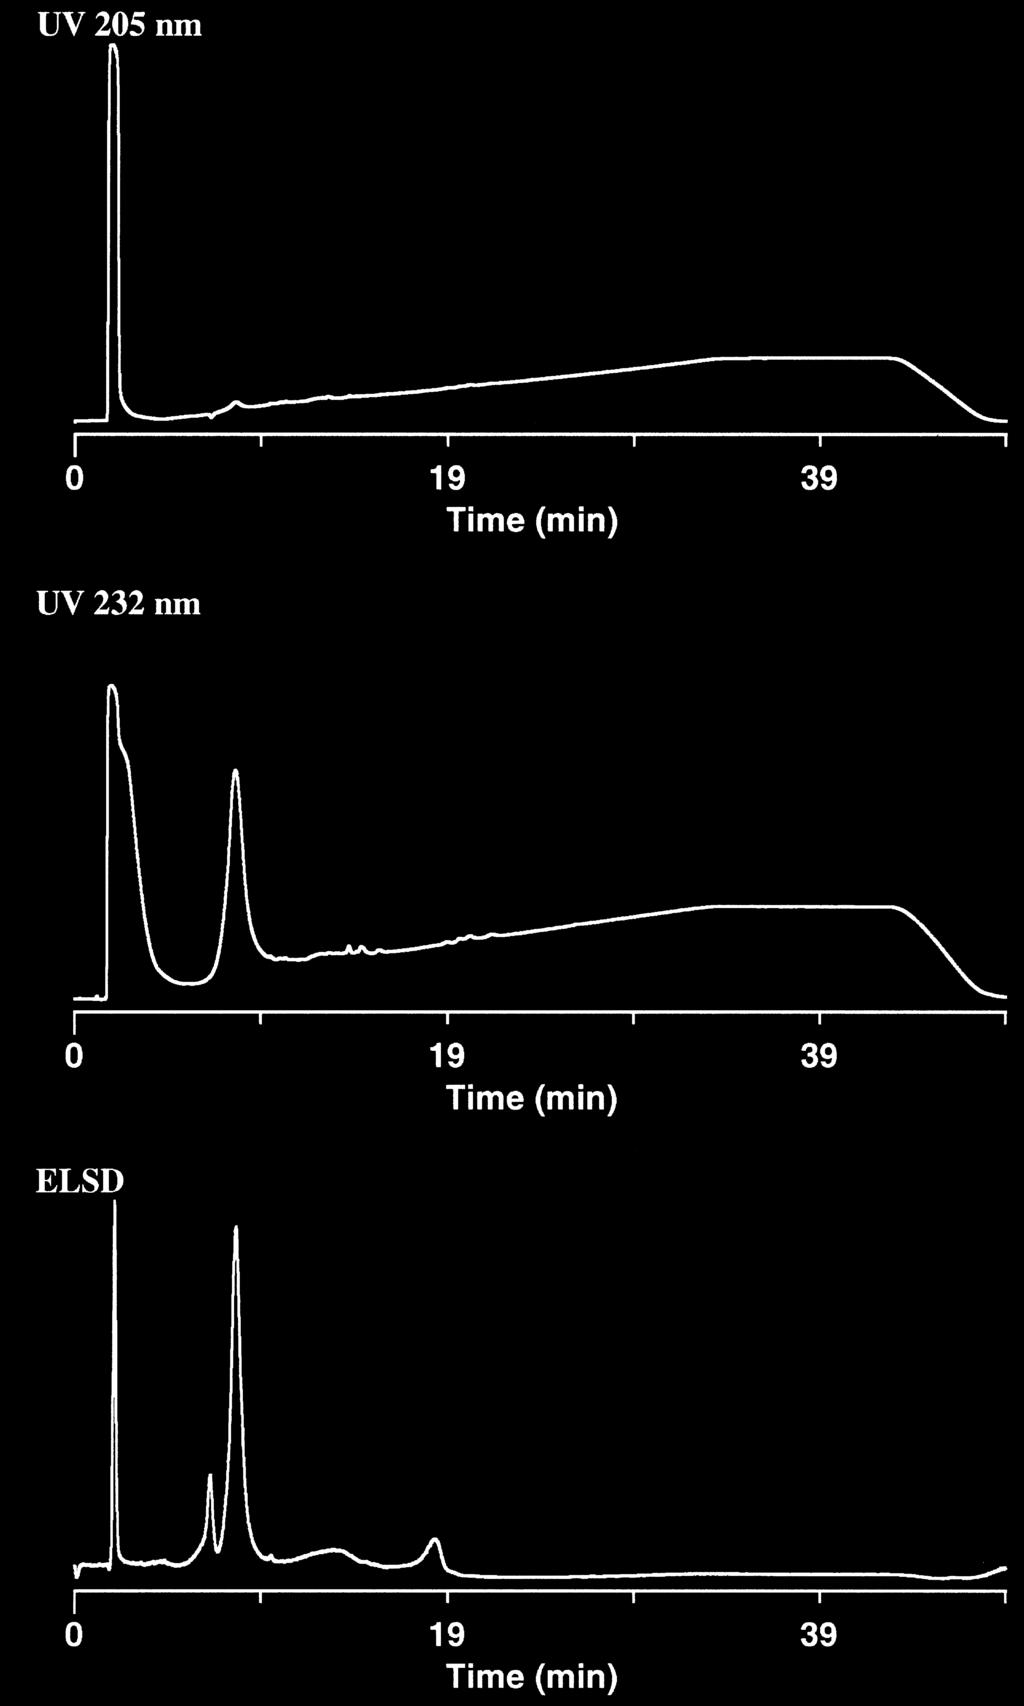 Since most drug substances are UV active, they can be observed on the UV signal of the chromatogram.